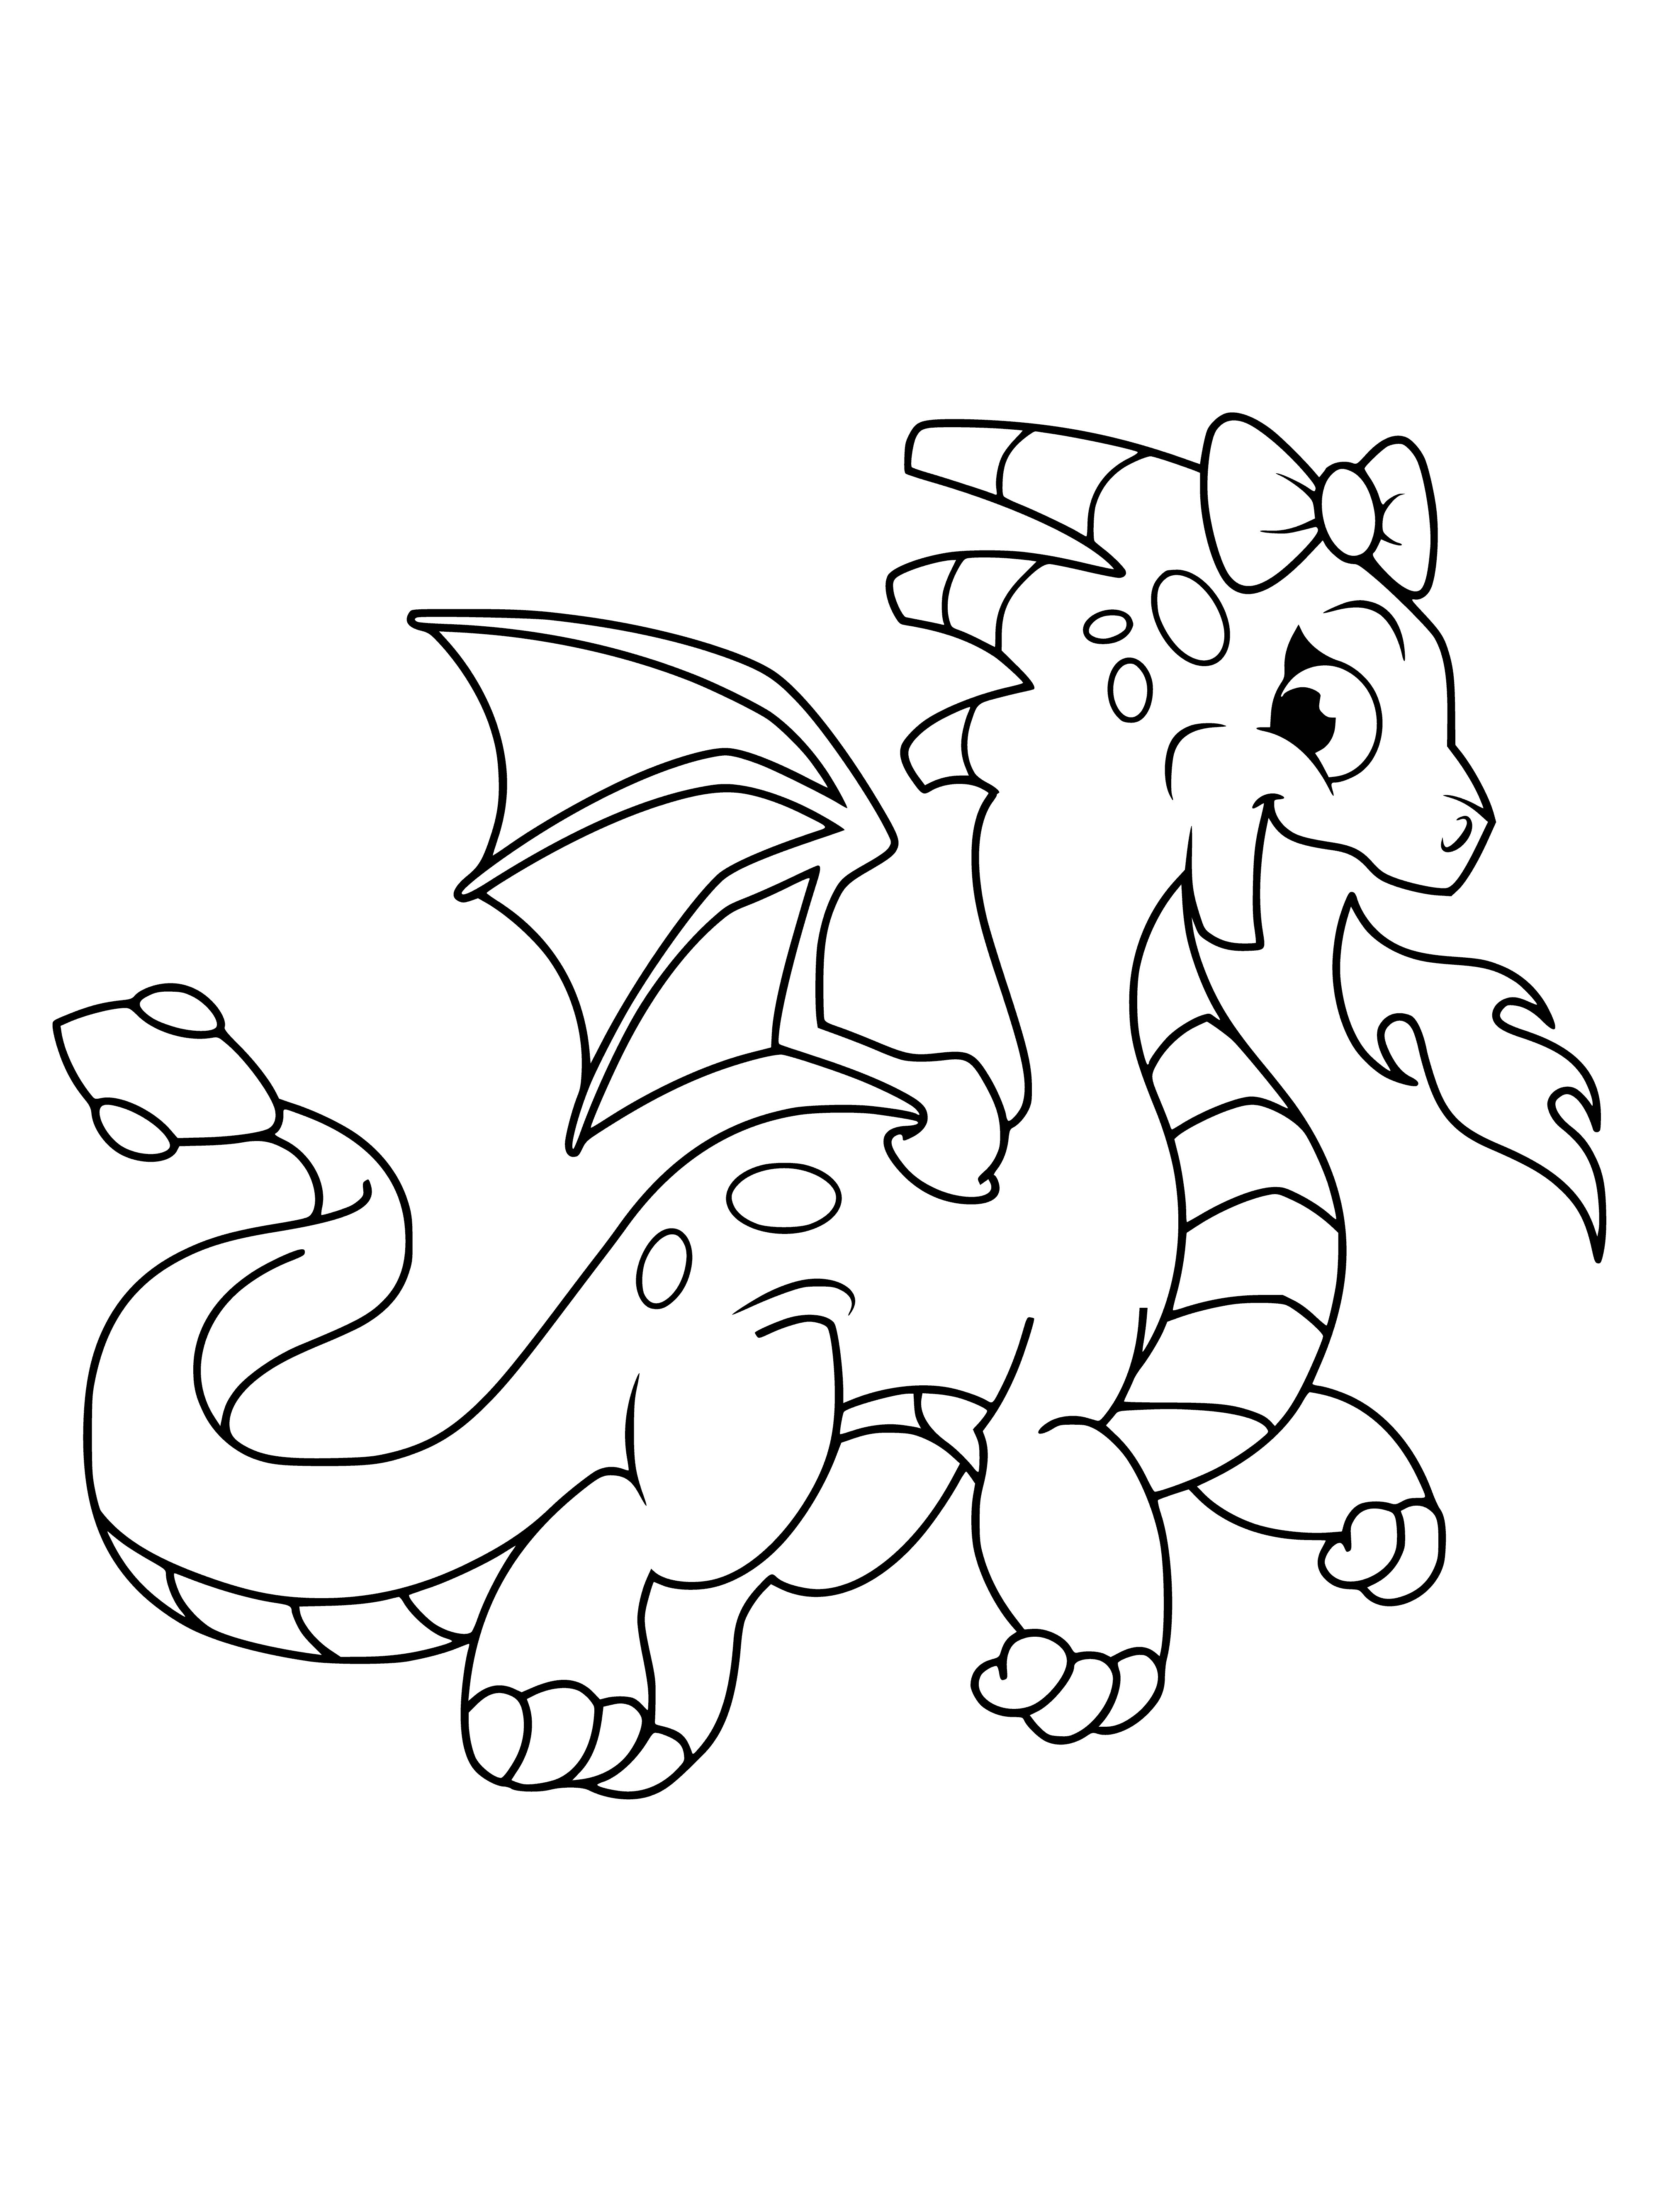 The dragon starts a fire coloring page